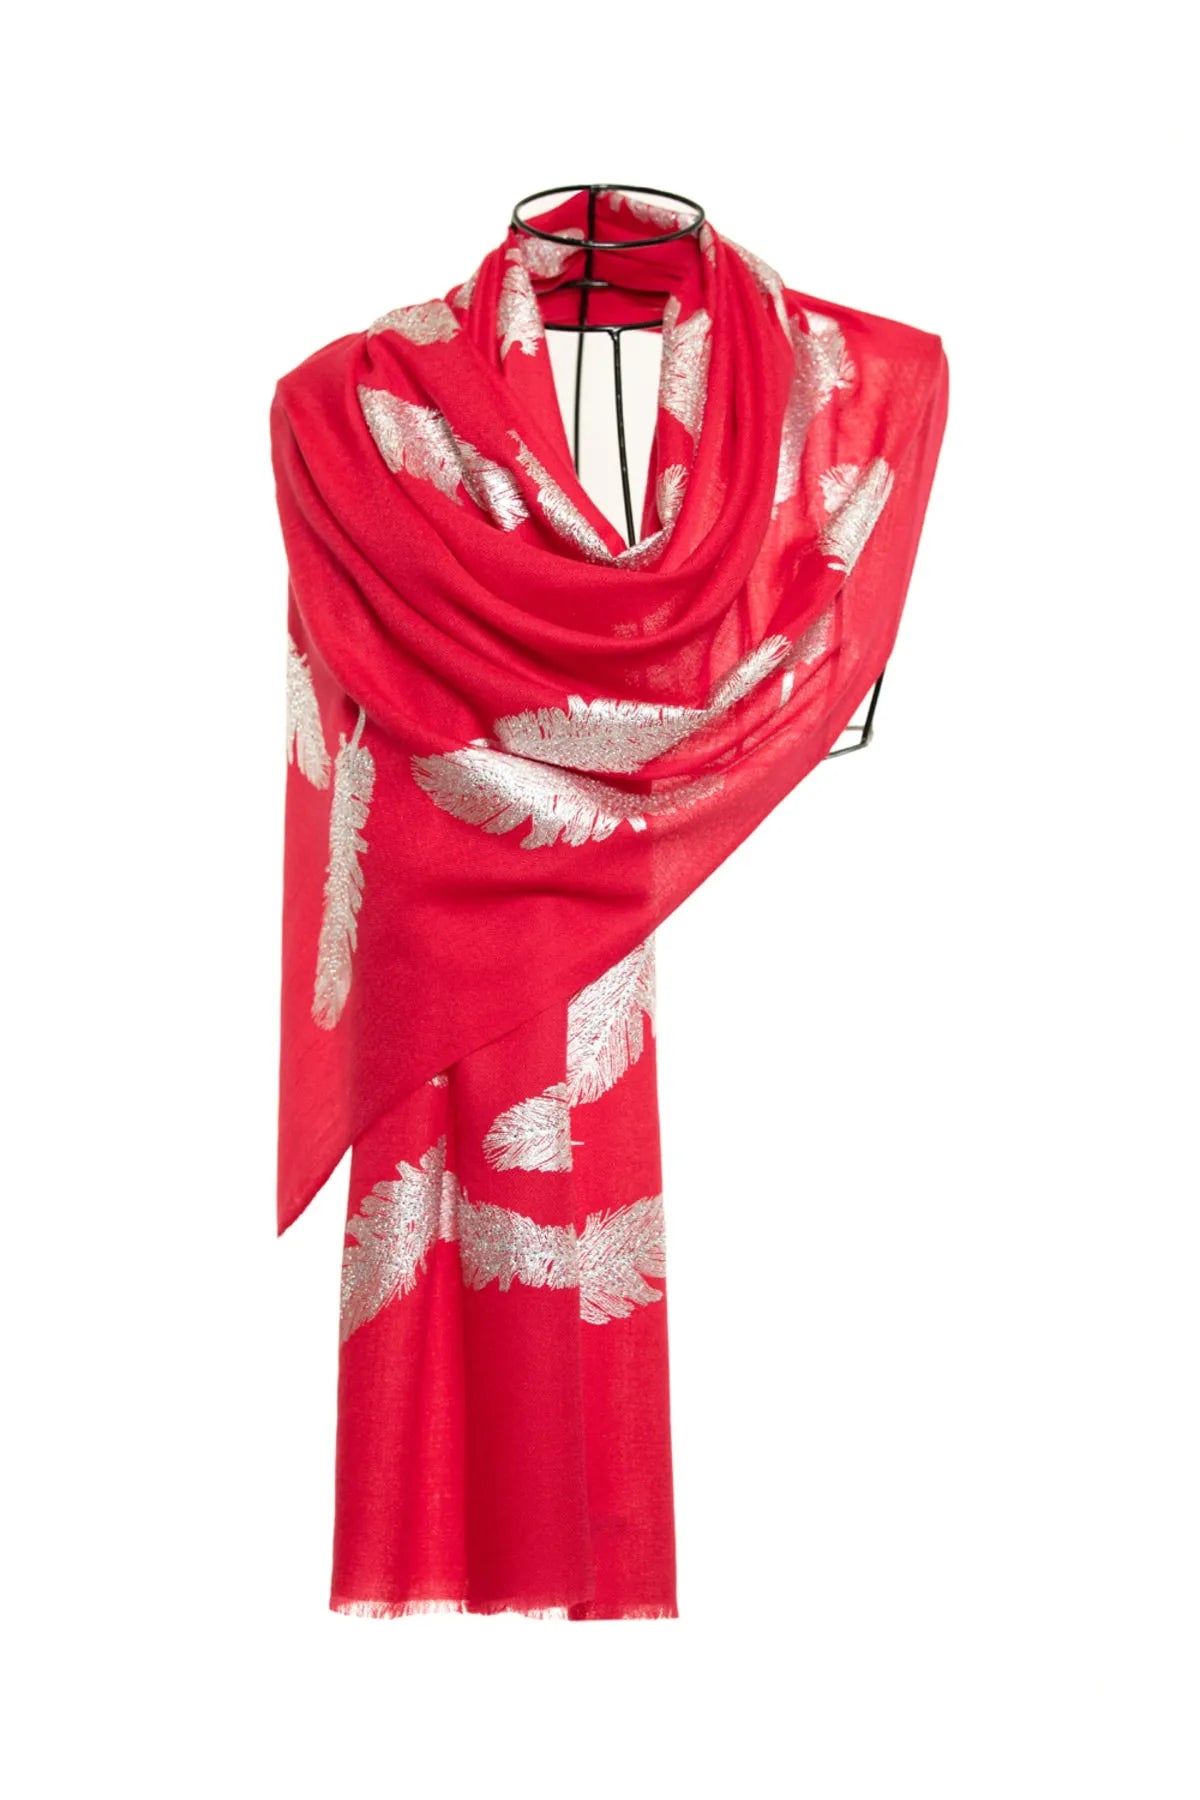 Angel Feathers Crystal Feathers Shawl Stole - Red Silver